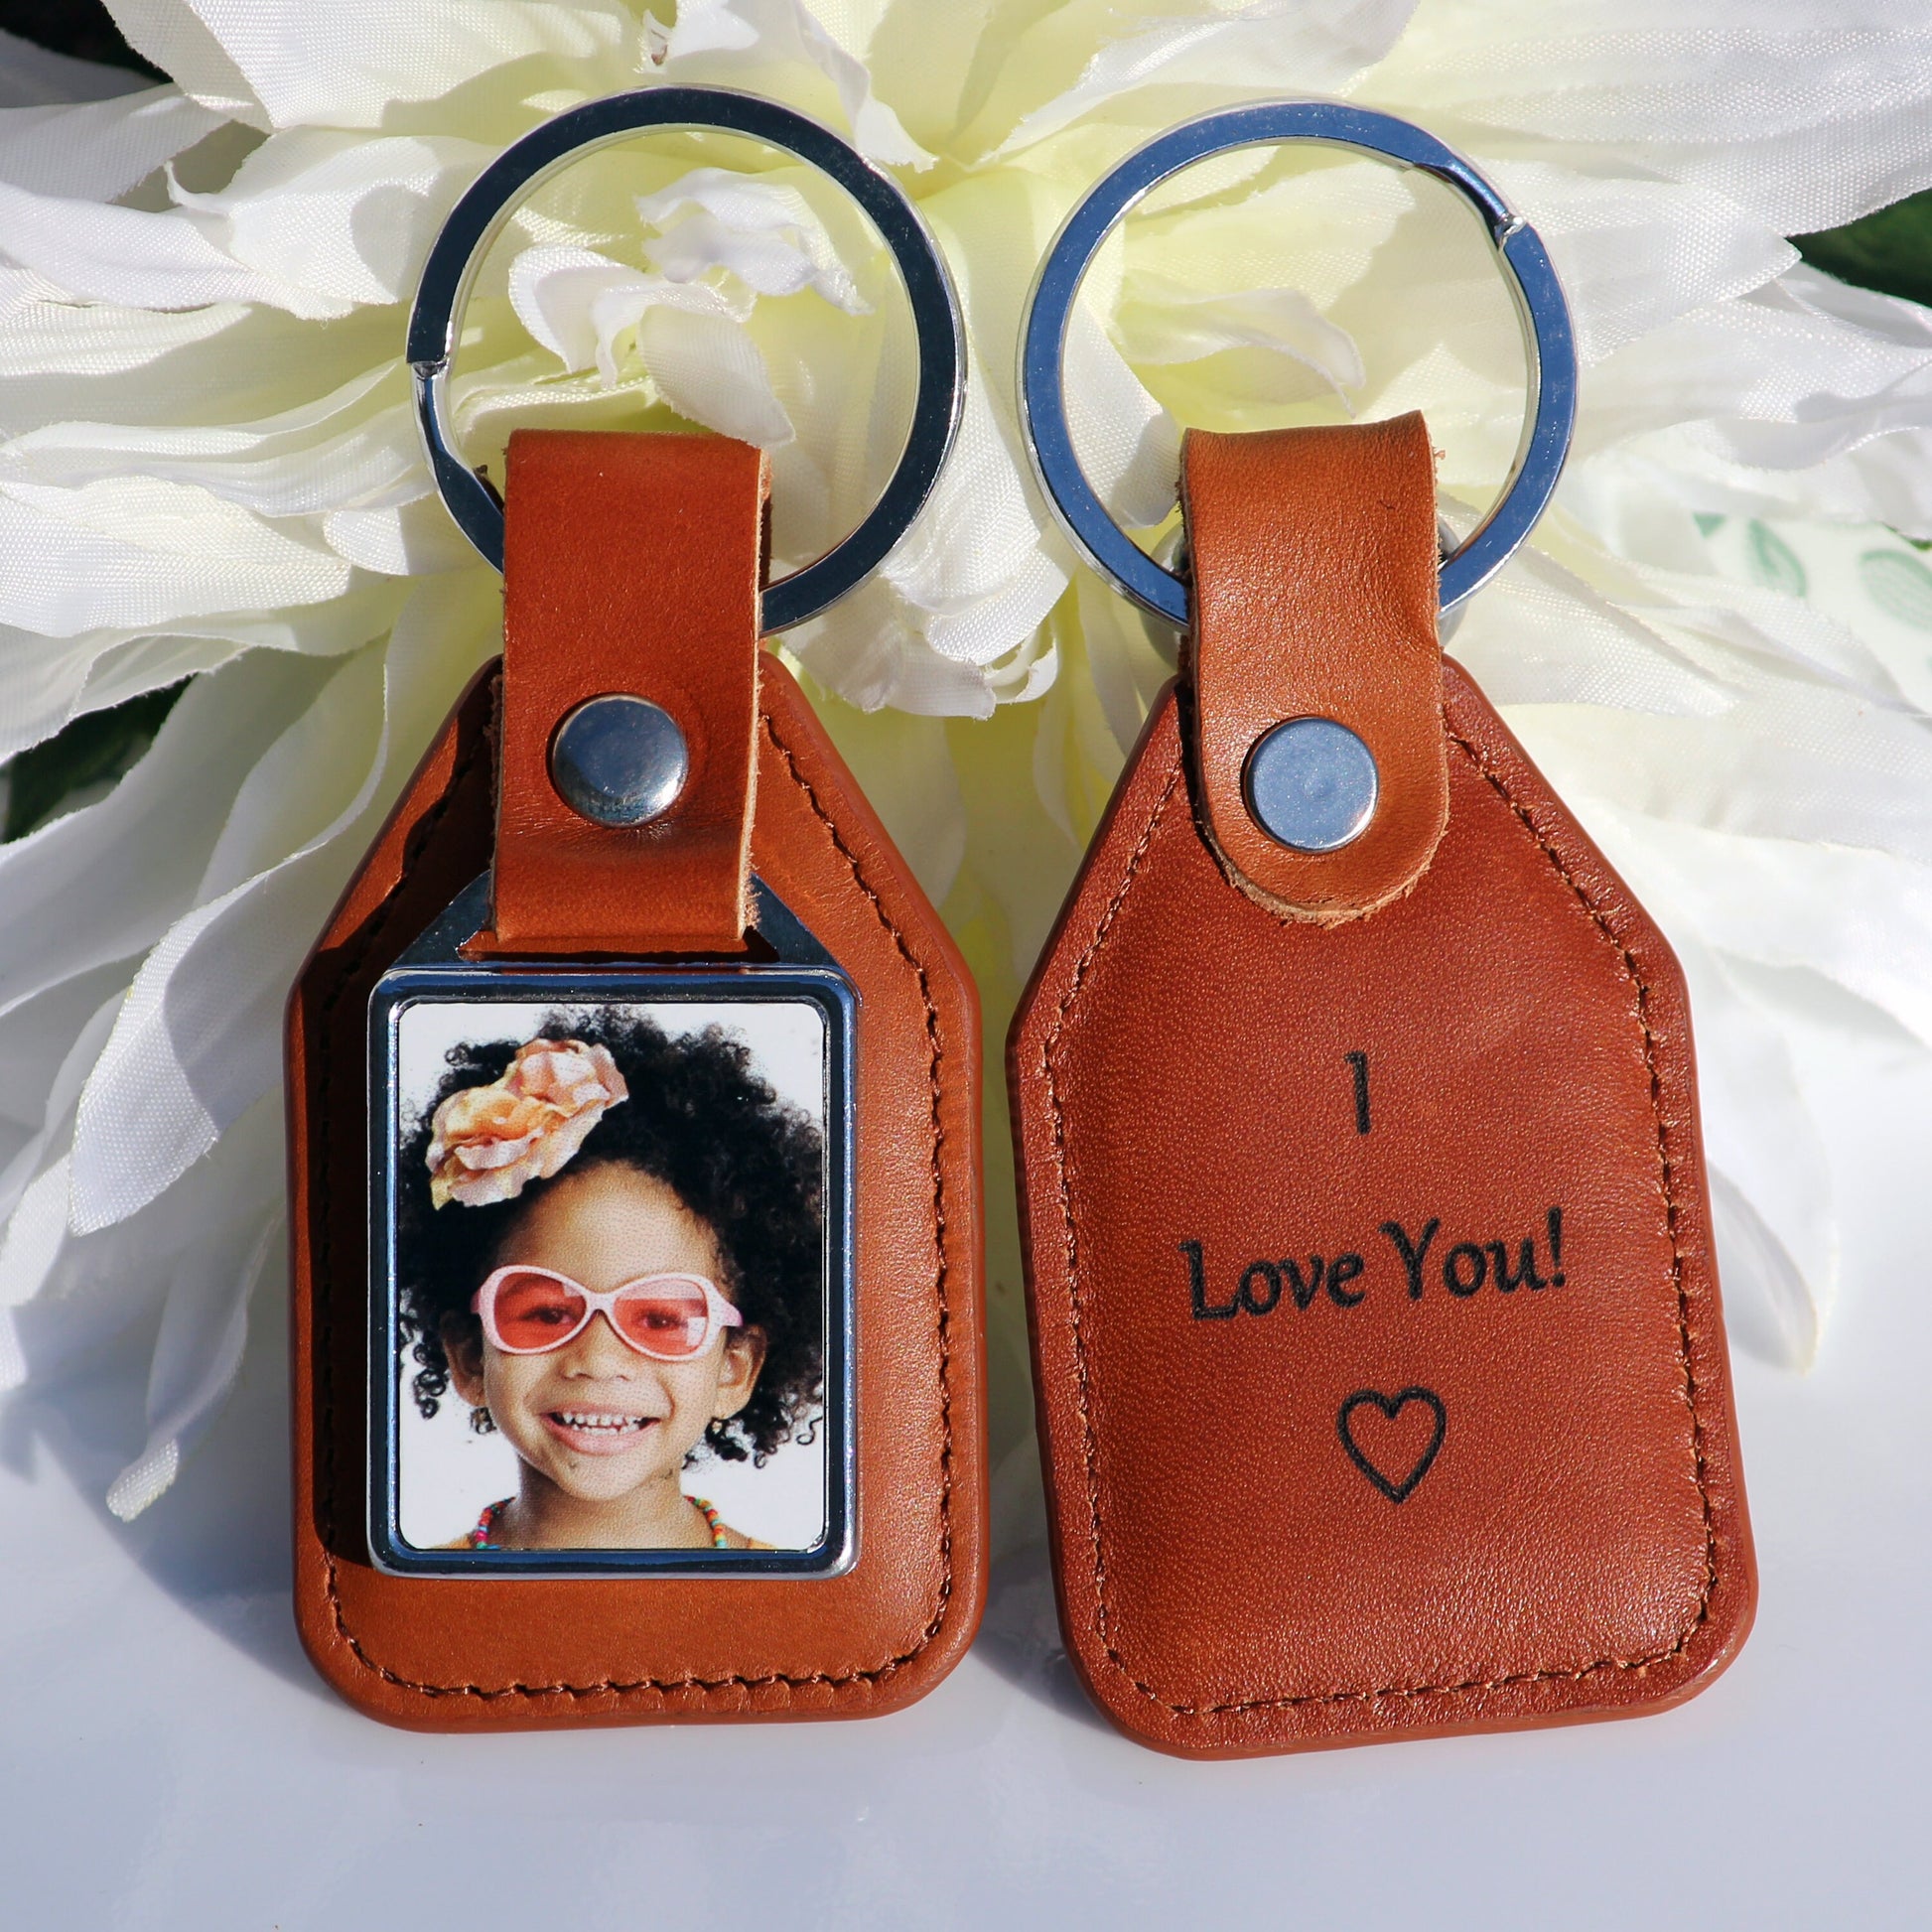 Photo Key Ring, Personalized Keychains, Handmade Gift, Drive Safe Key Holder Gift - Birthday, Wedding, Fathers Day, Mothers Day Gift